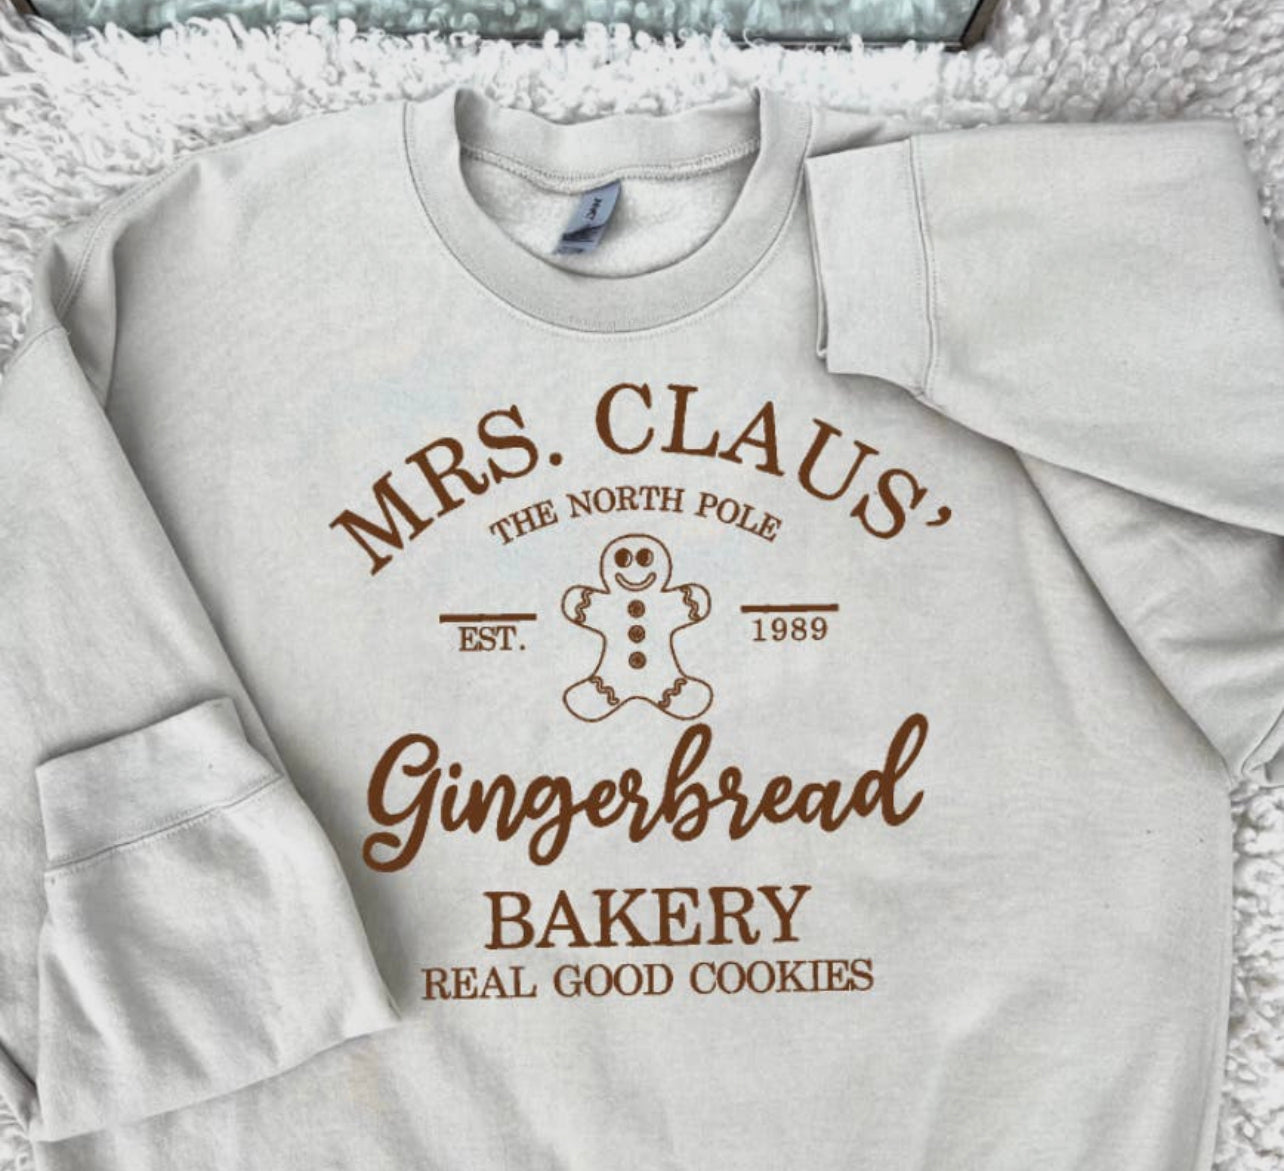 Mrs Claus Gingerbread Bakery